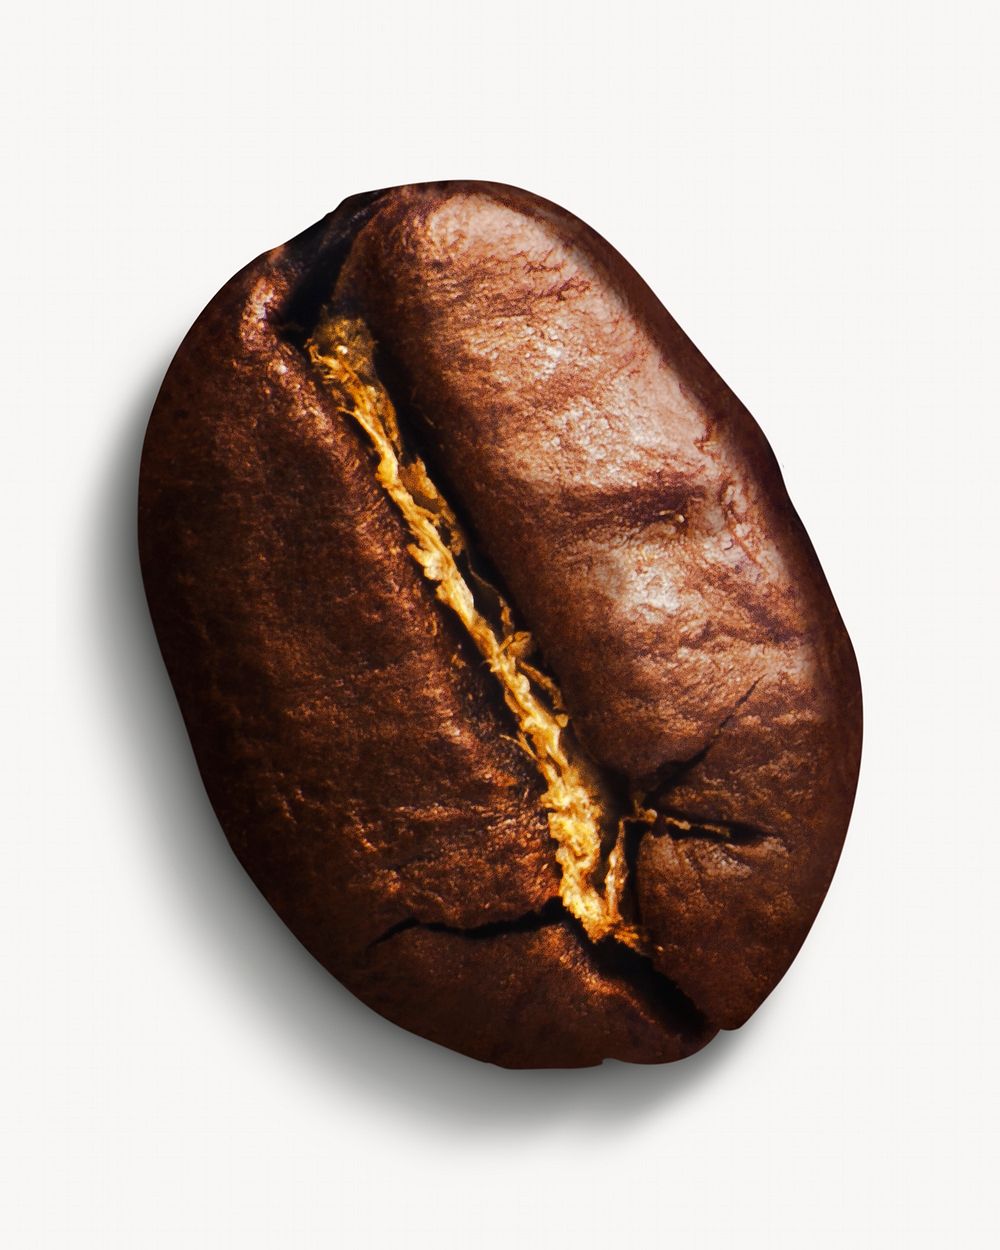 Coffee bean, isolated image